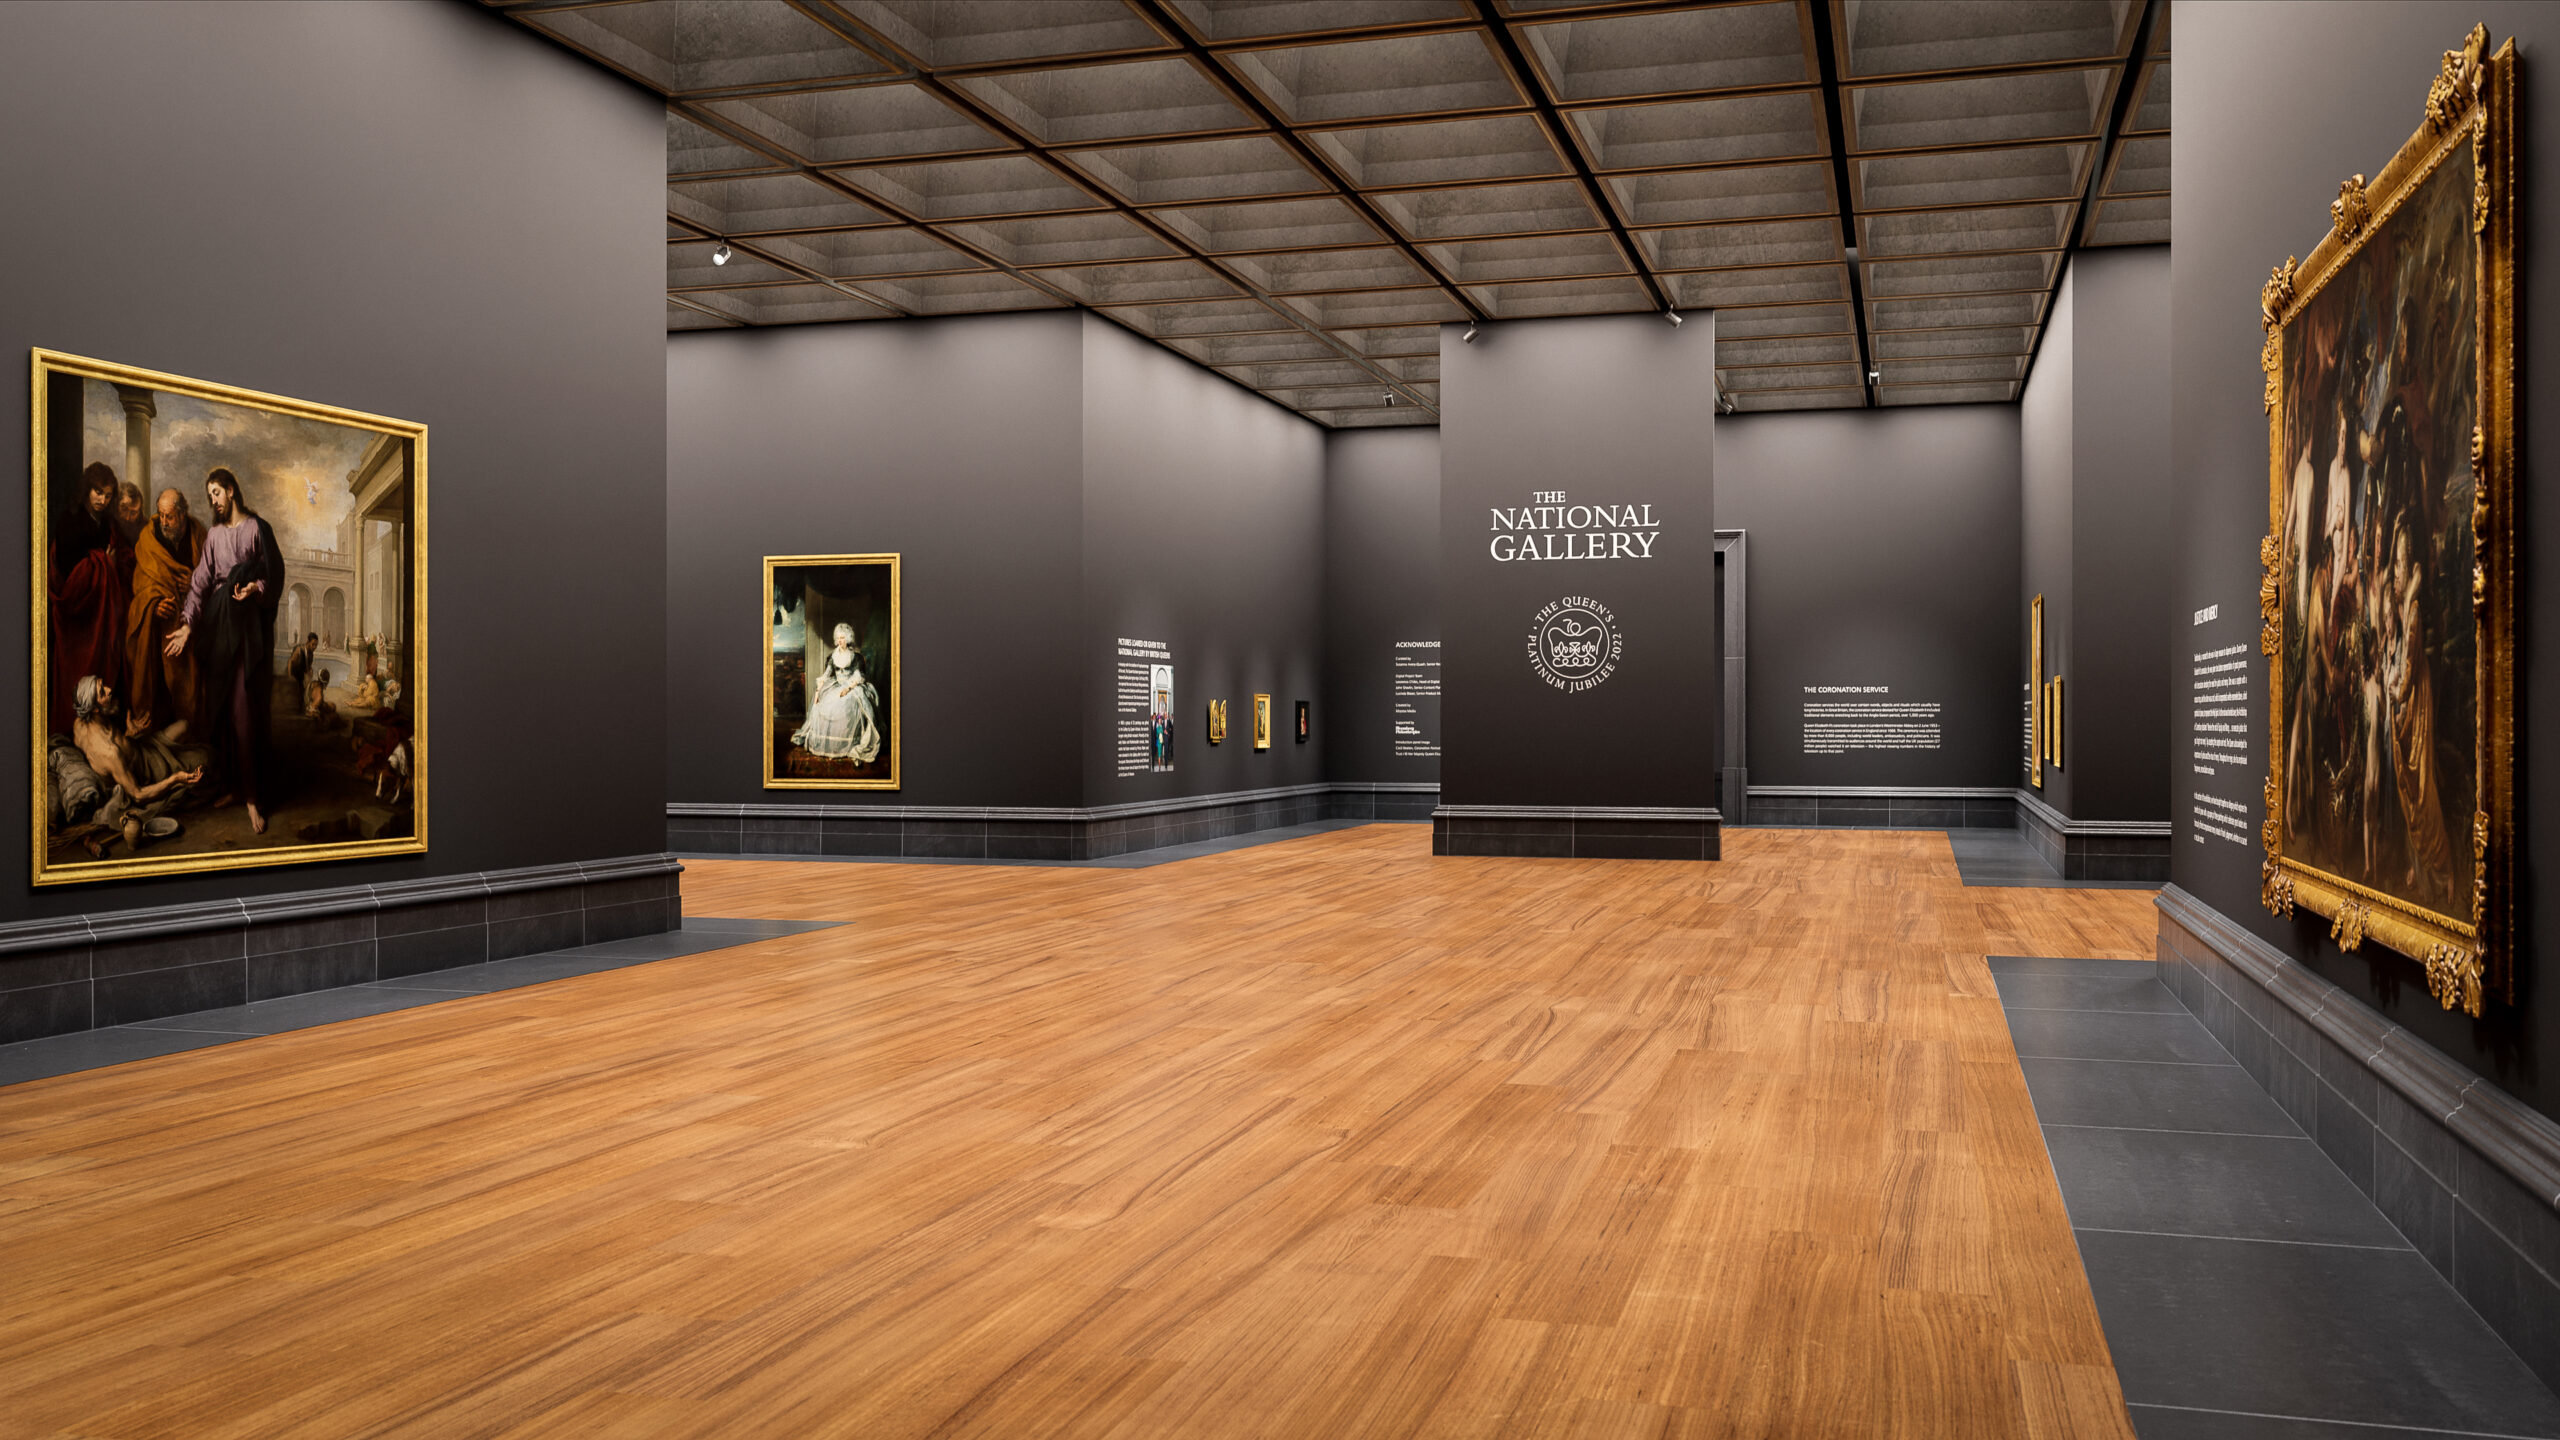 national gallery london moyosa spaces virtual gallery